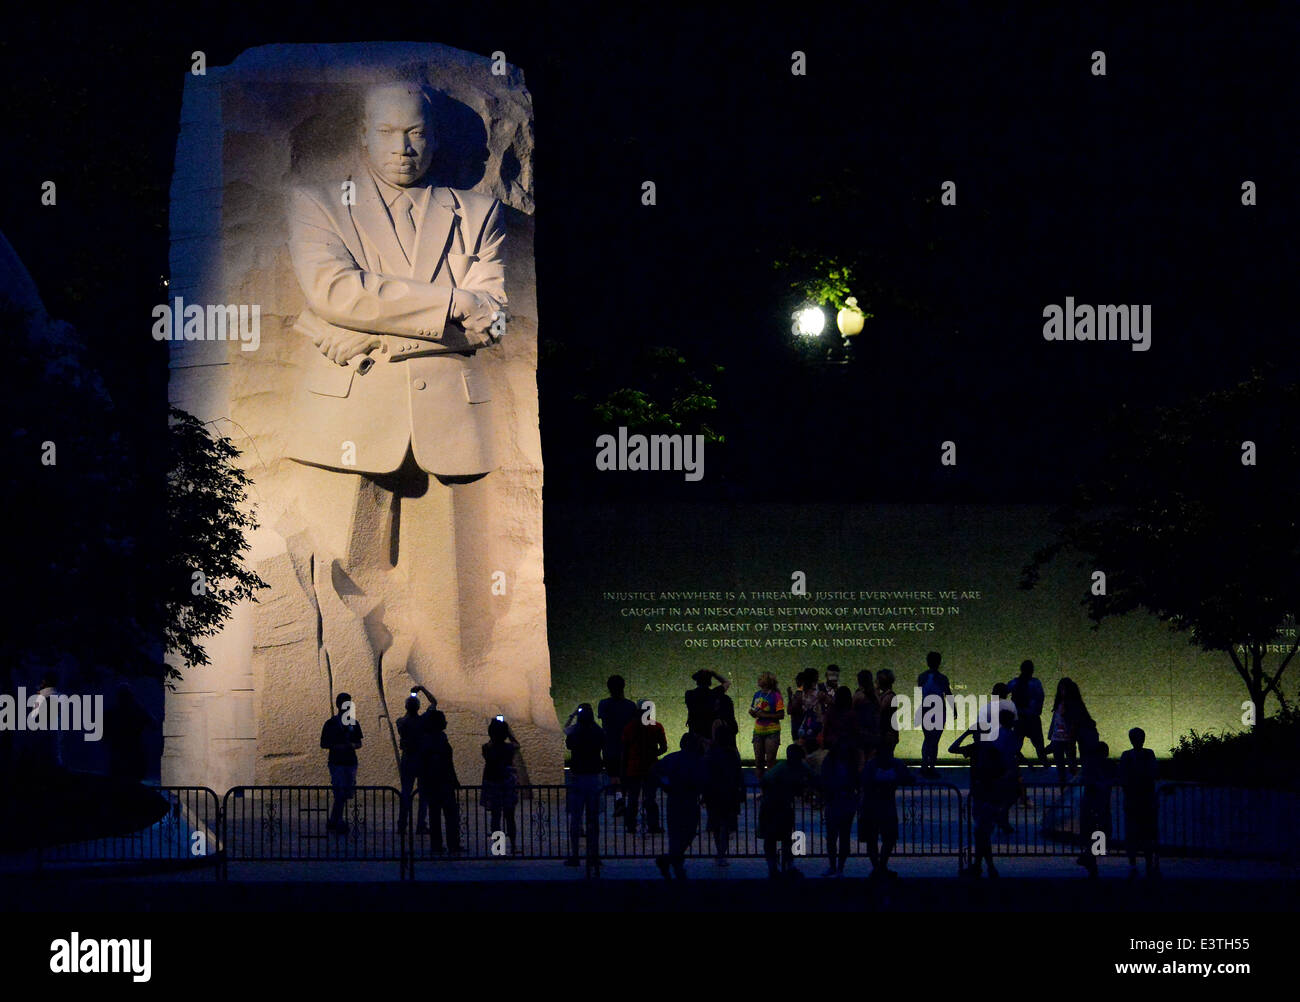 Tourists gather at night to visit the Martin Luther King Jr. Memorial June 18, 2014 in Washington, D.C. Stock Photo